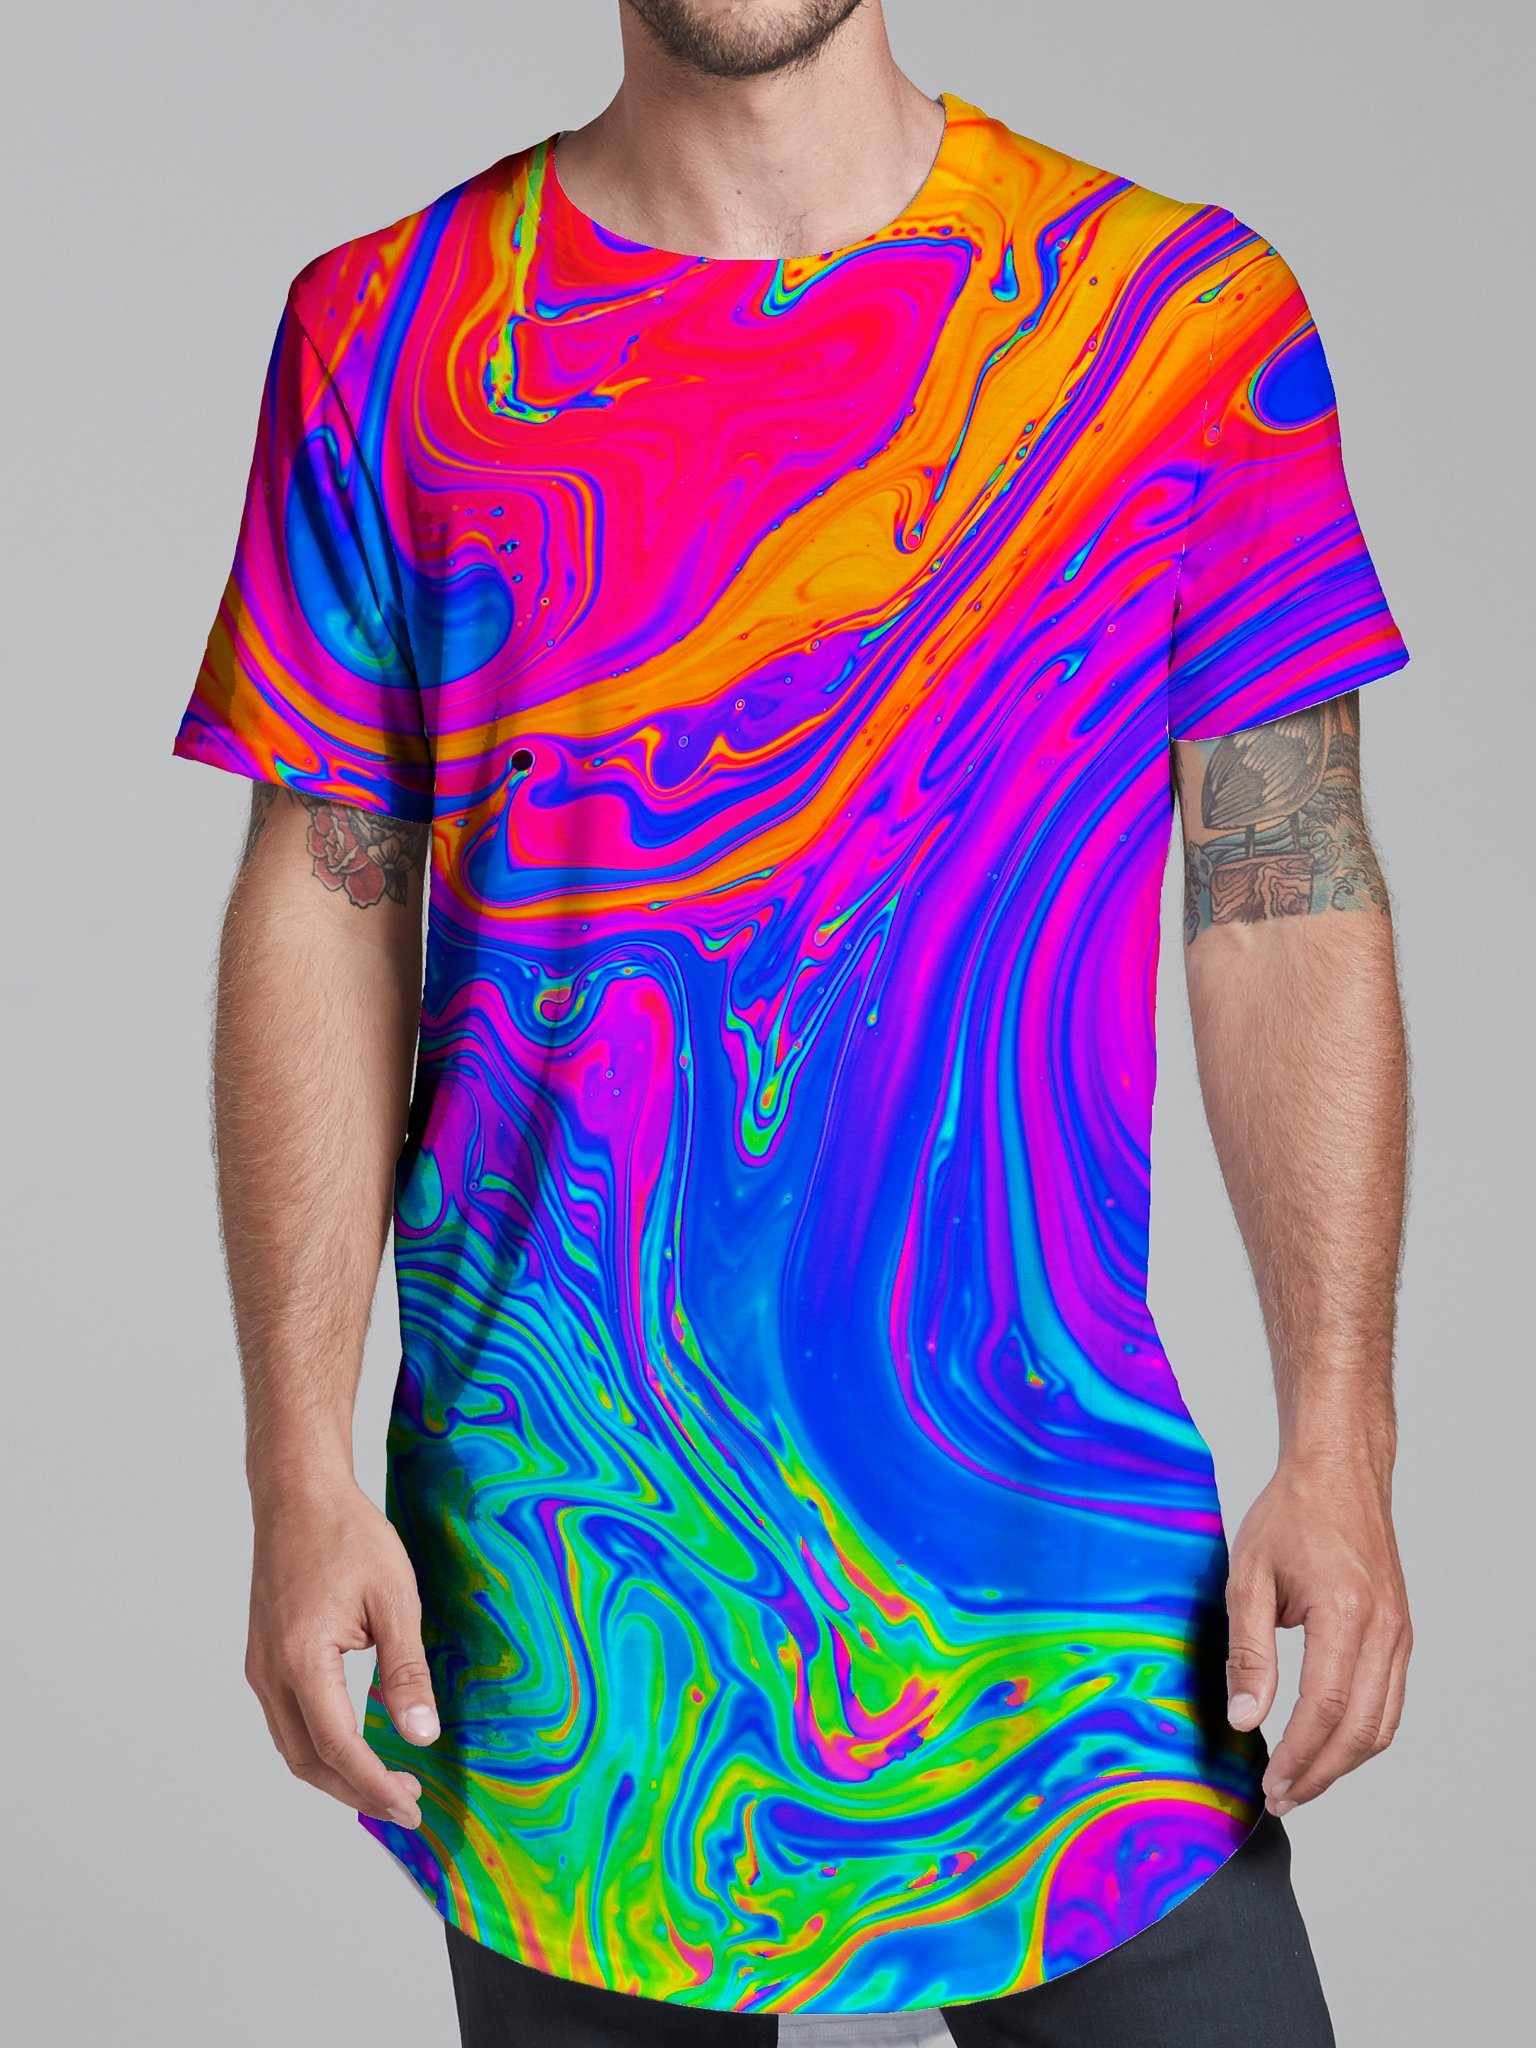 Neon Clothes - Blacklight Reactive Festival Clothing | ElectroThreads ...